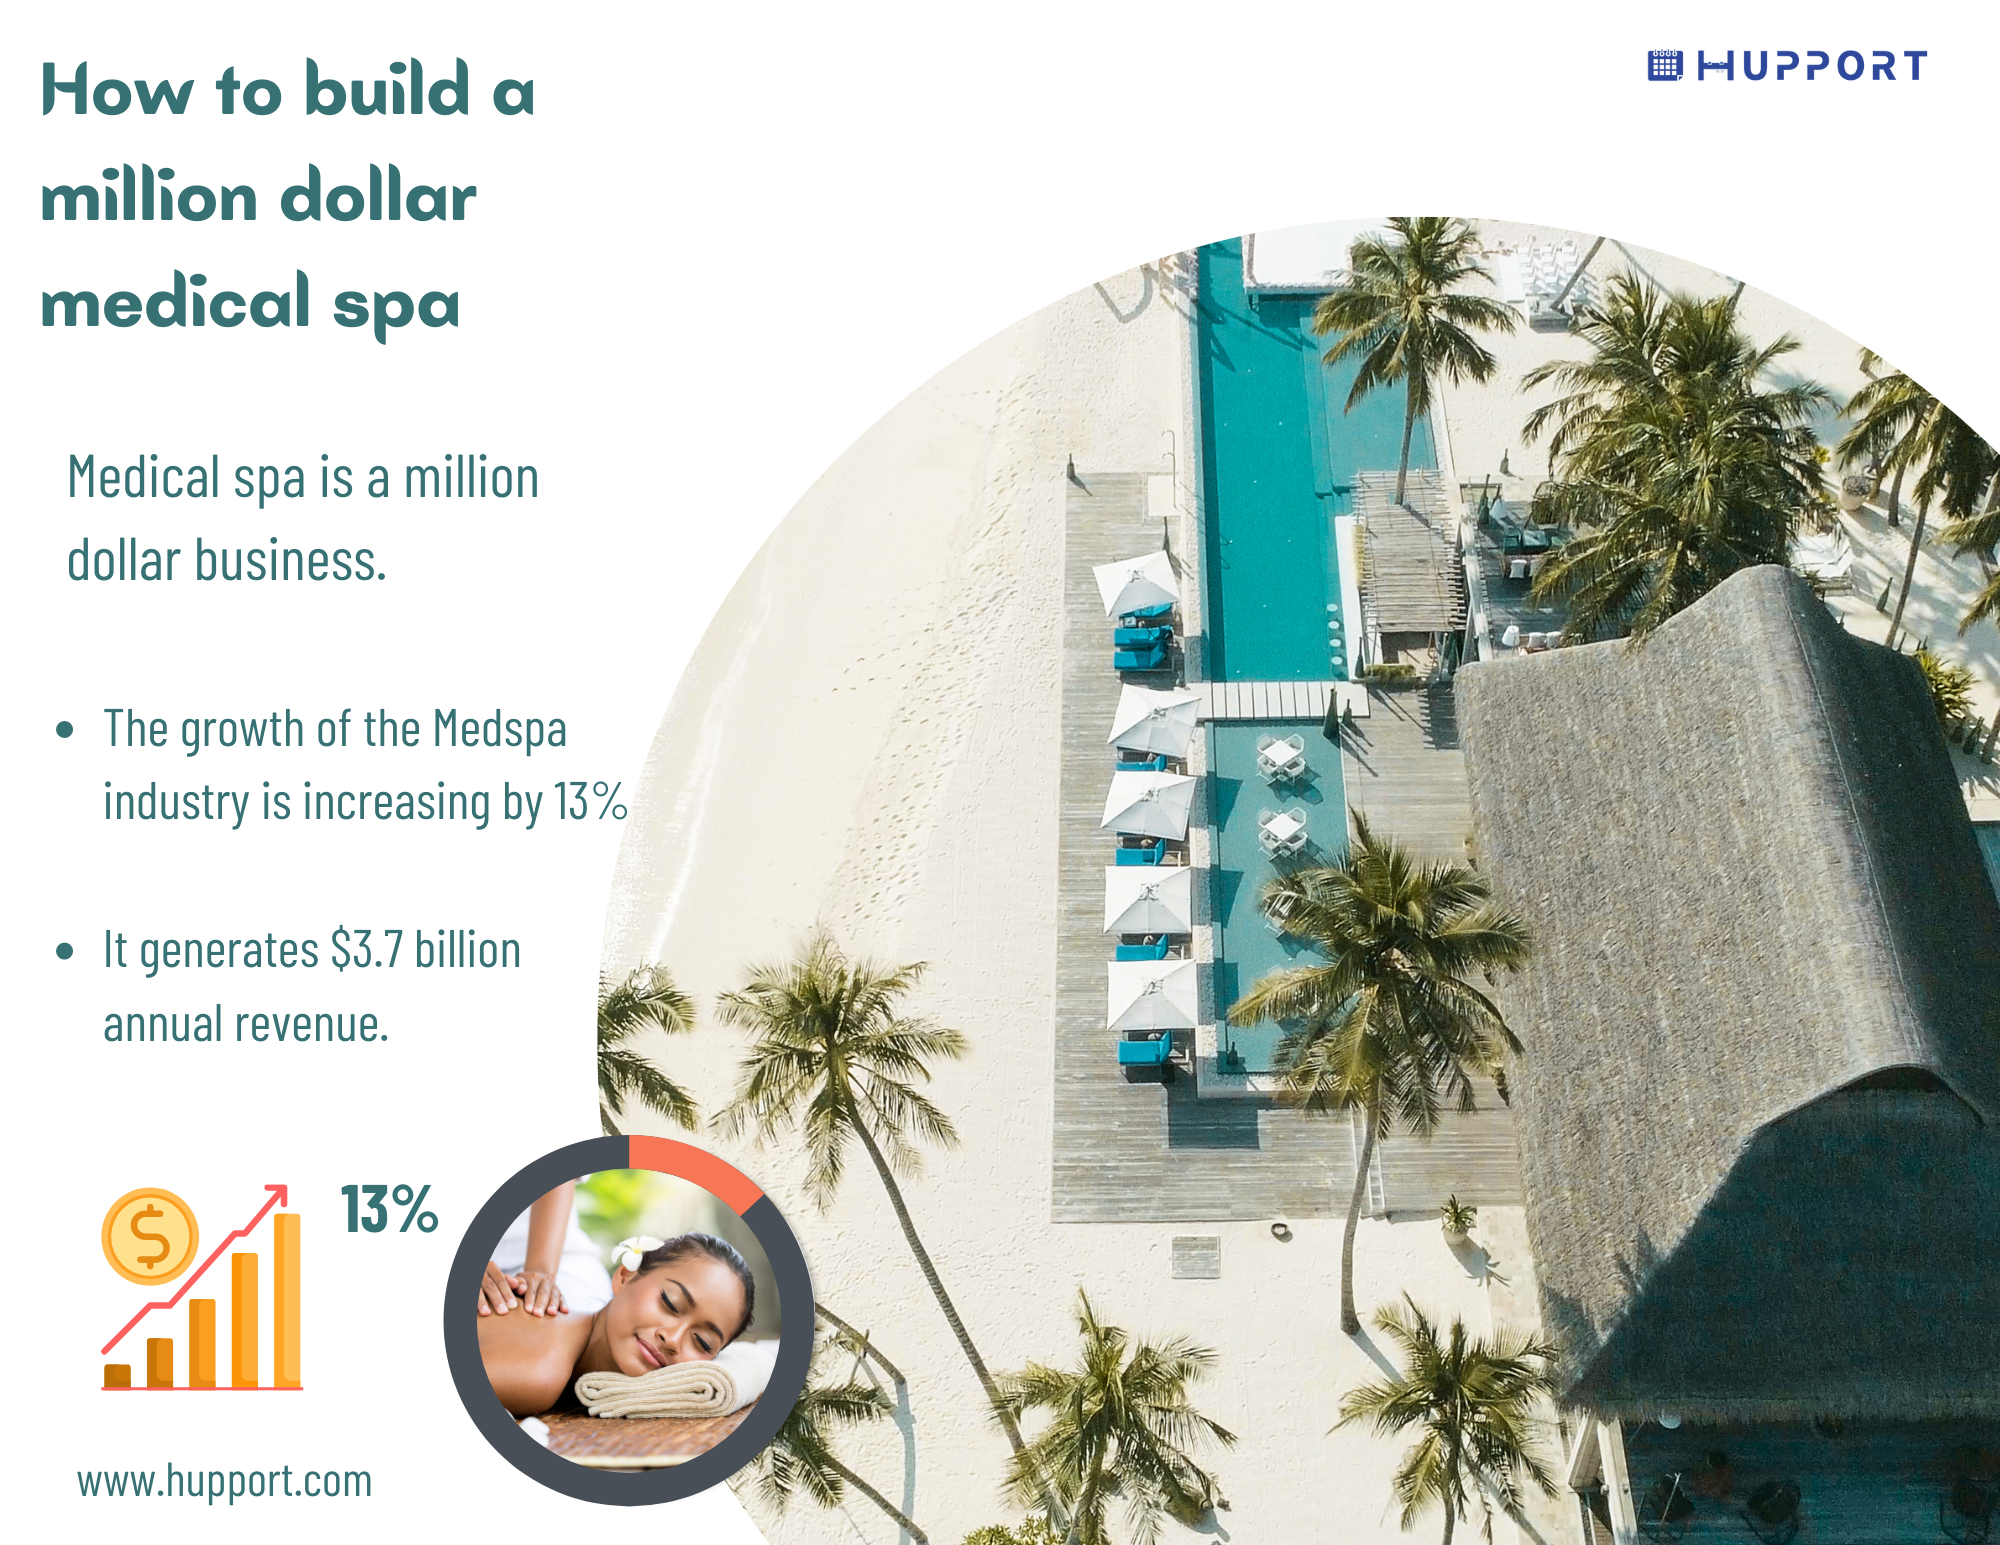 How to build a million dollar medical spa